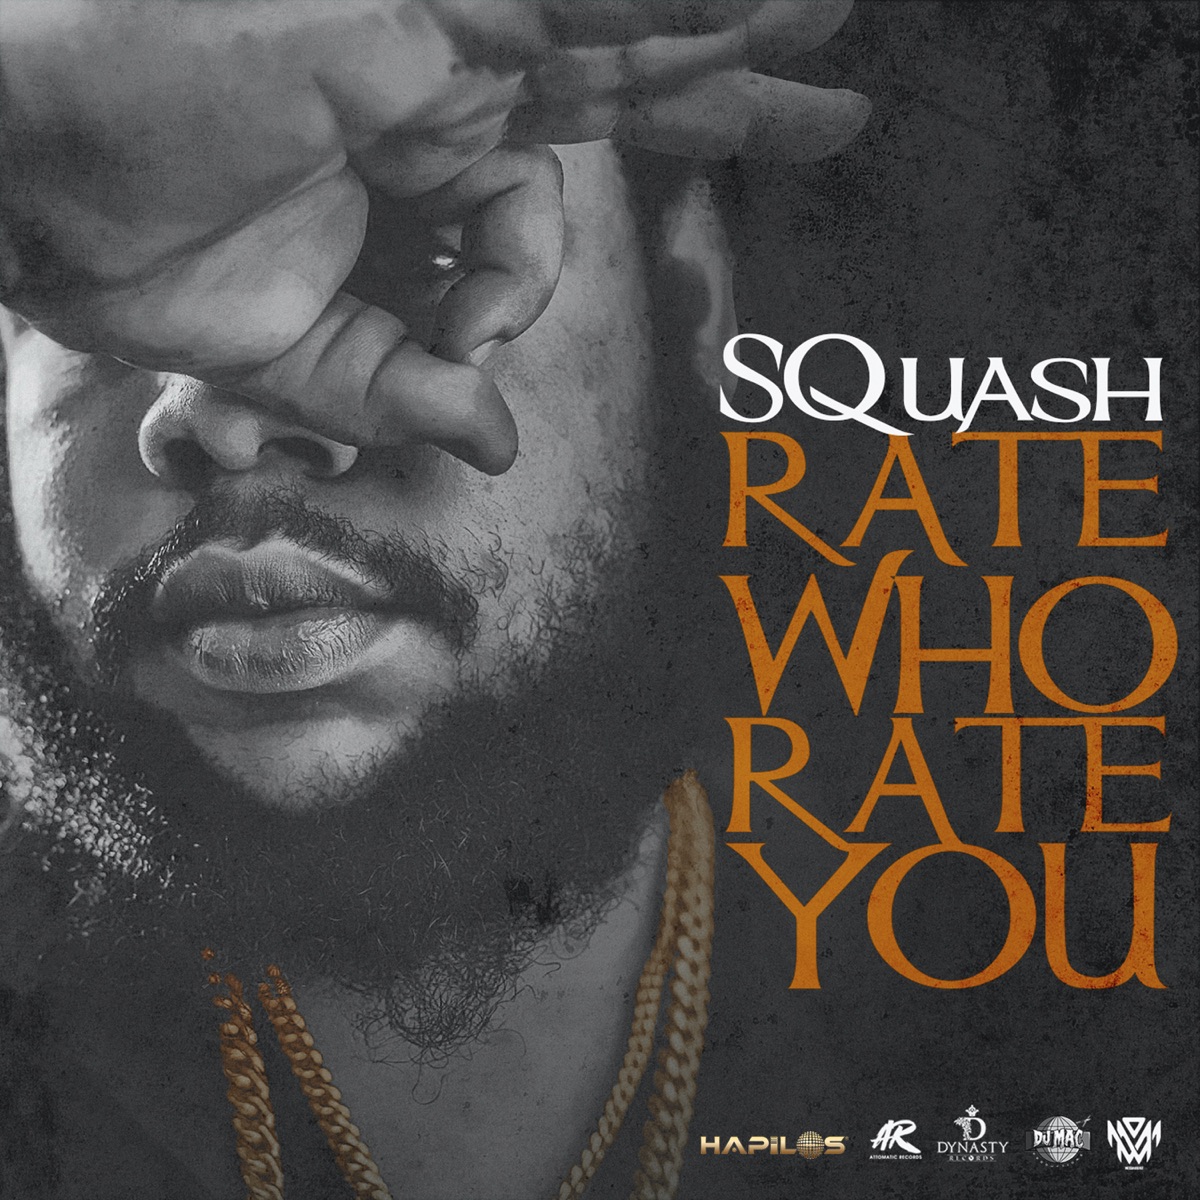 Who produced “Don't Play with Me” by SQUASH?